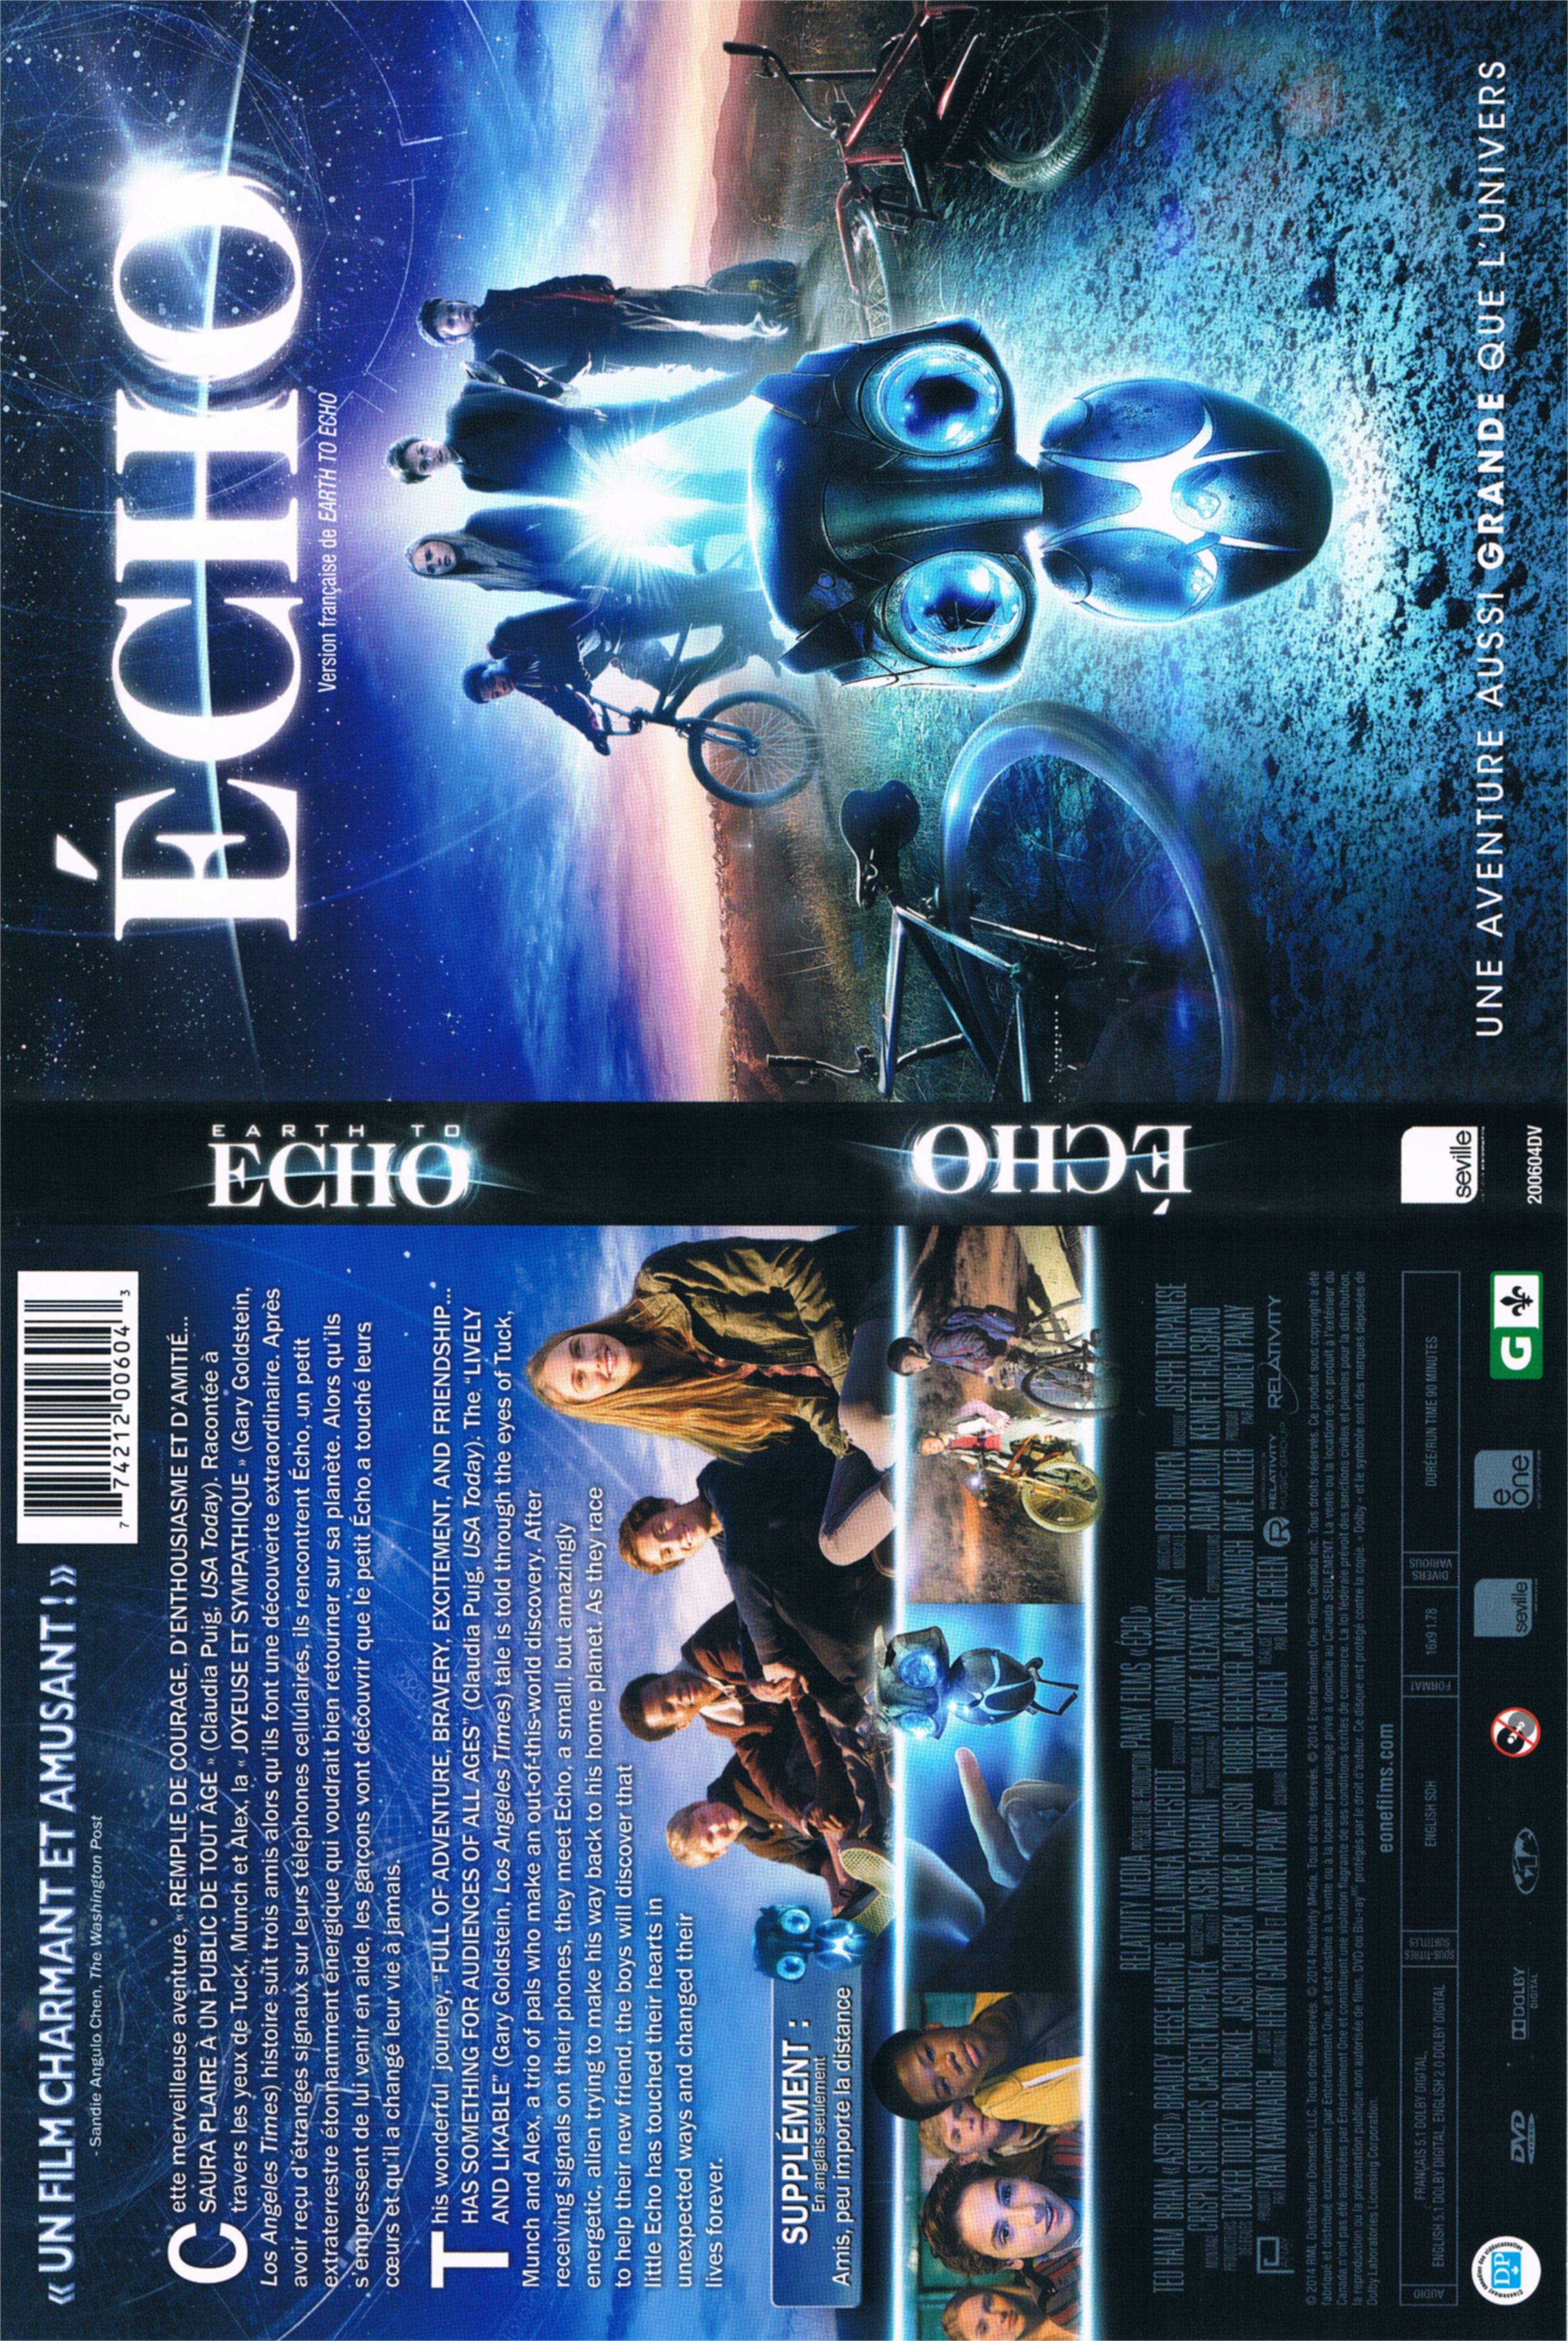 Earth To Echo Official Trailer #2 2014 - Sci-Fi